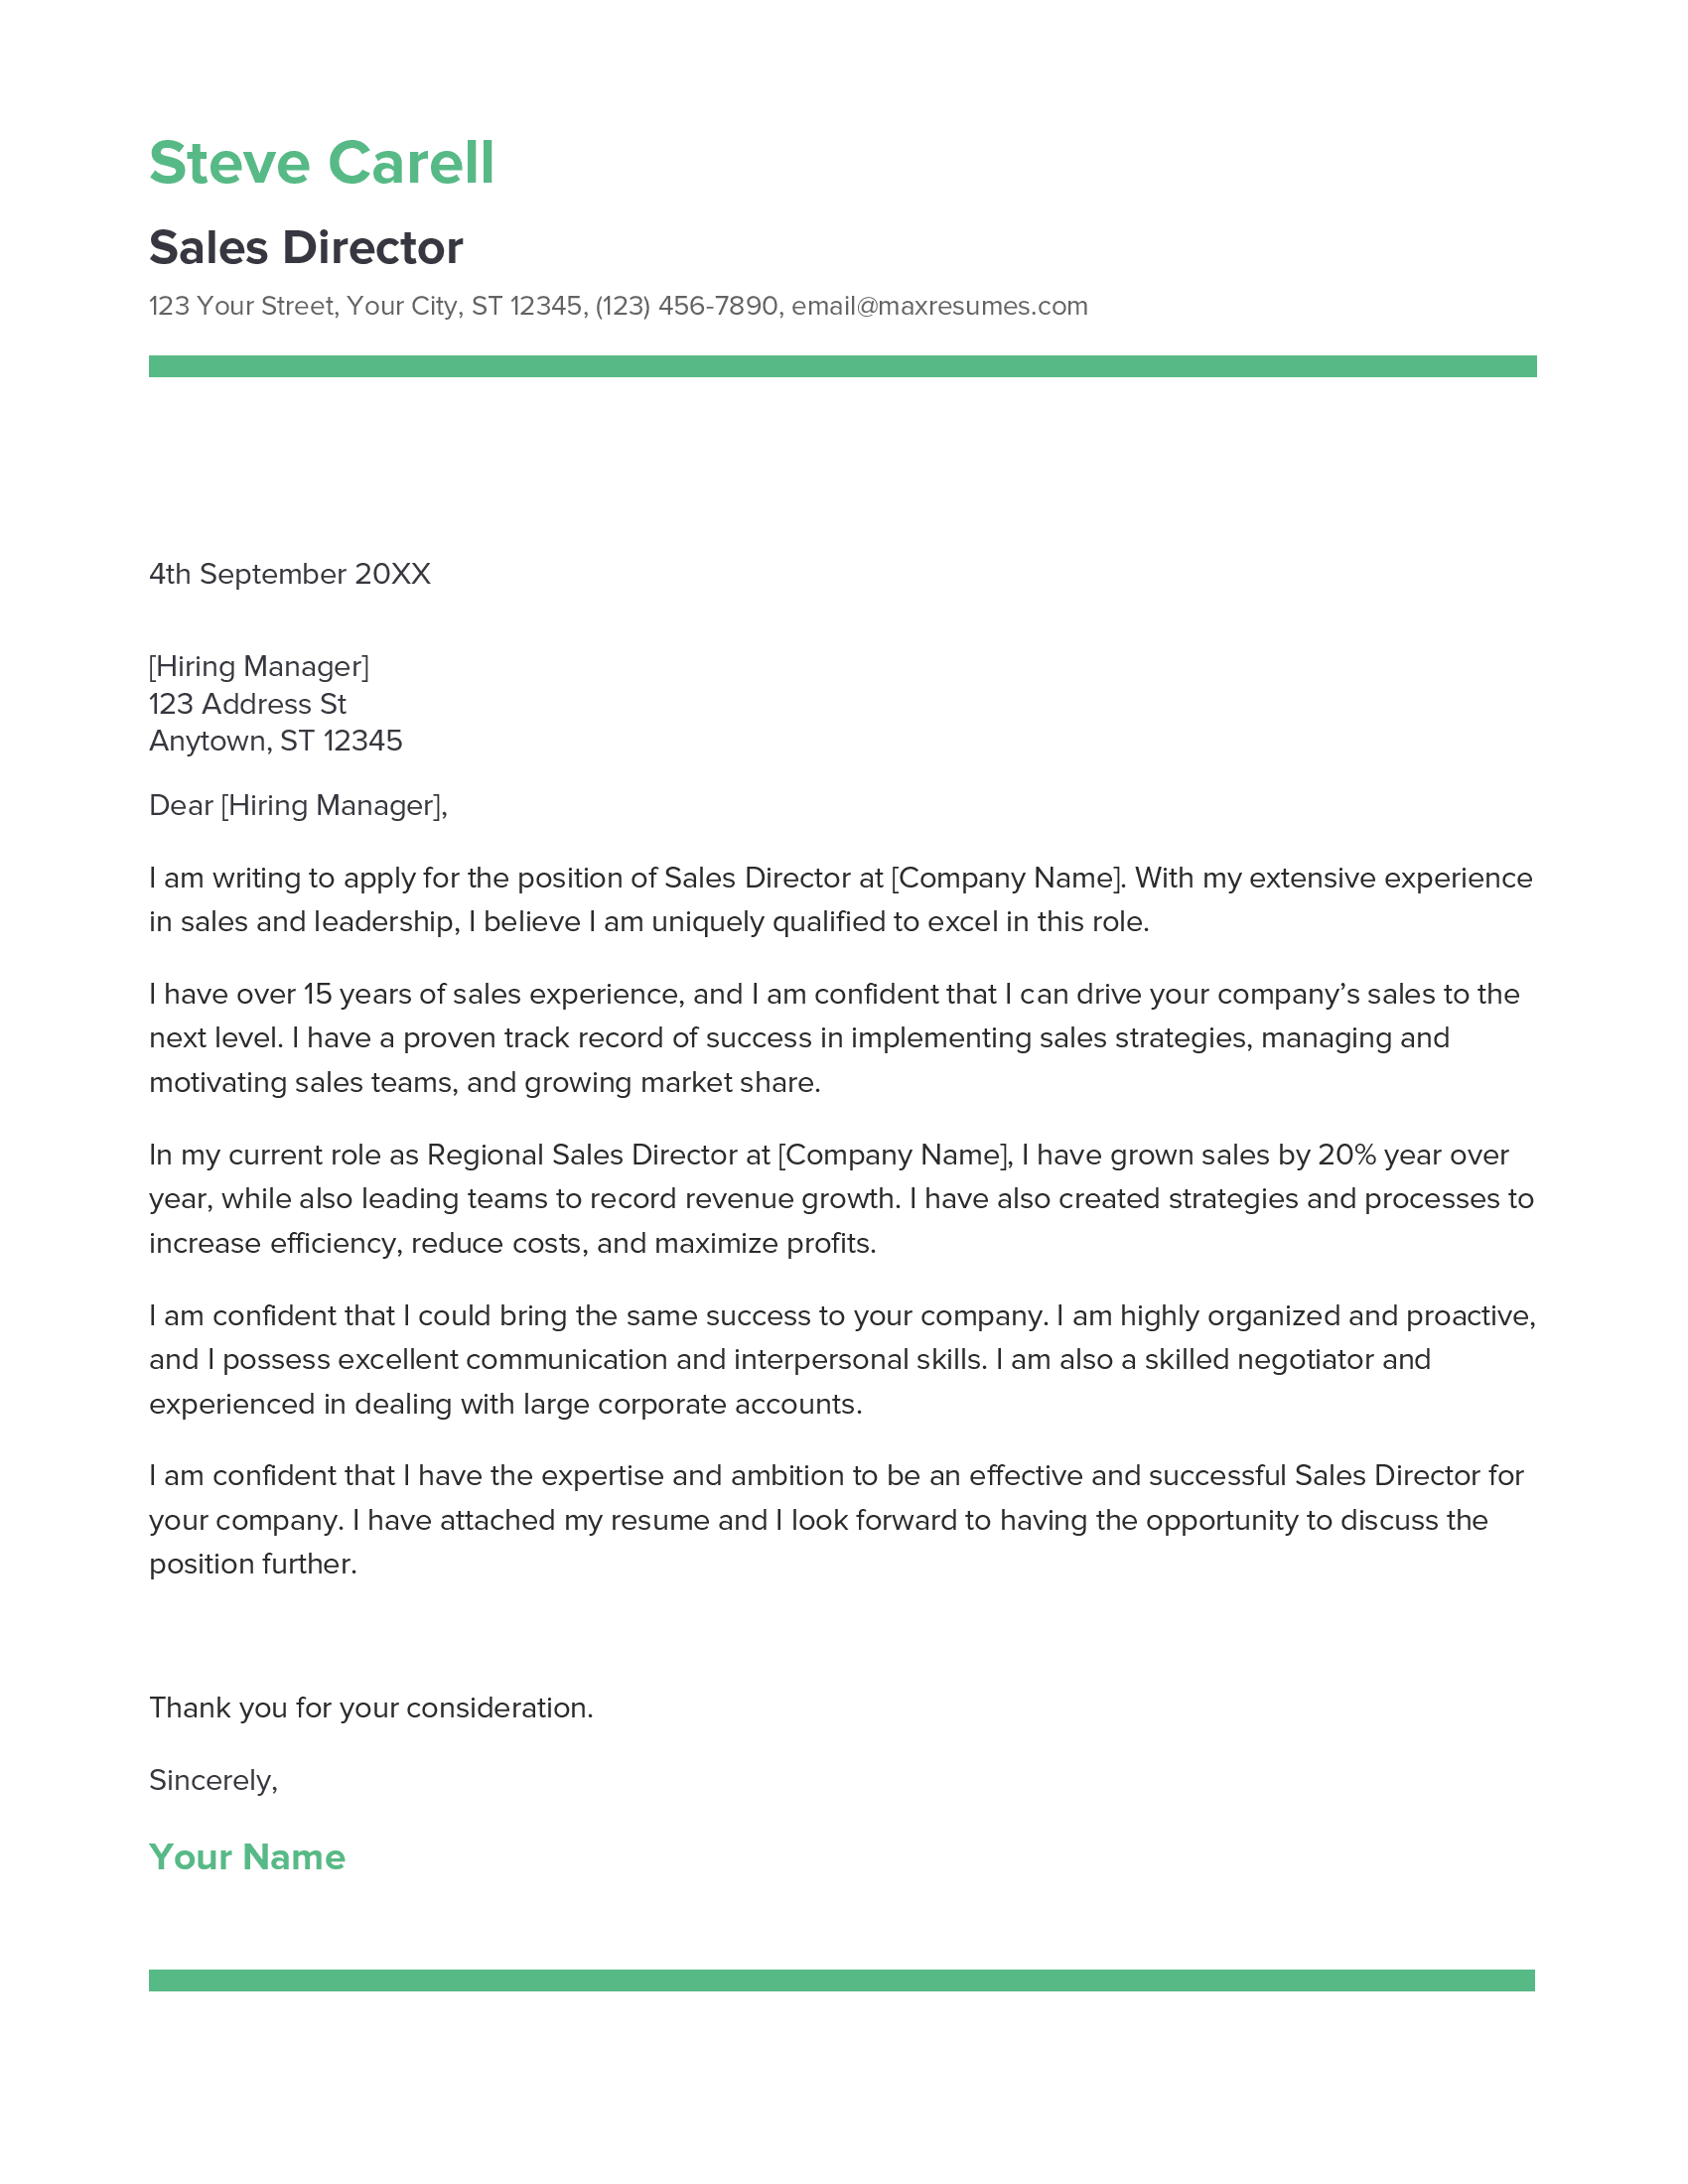 Sales Director Cover Letter Example